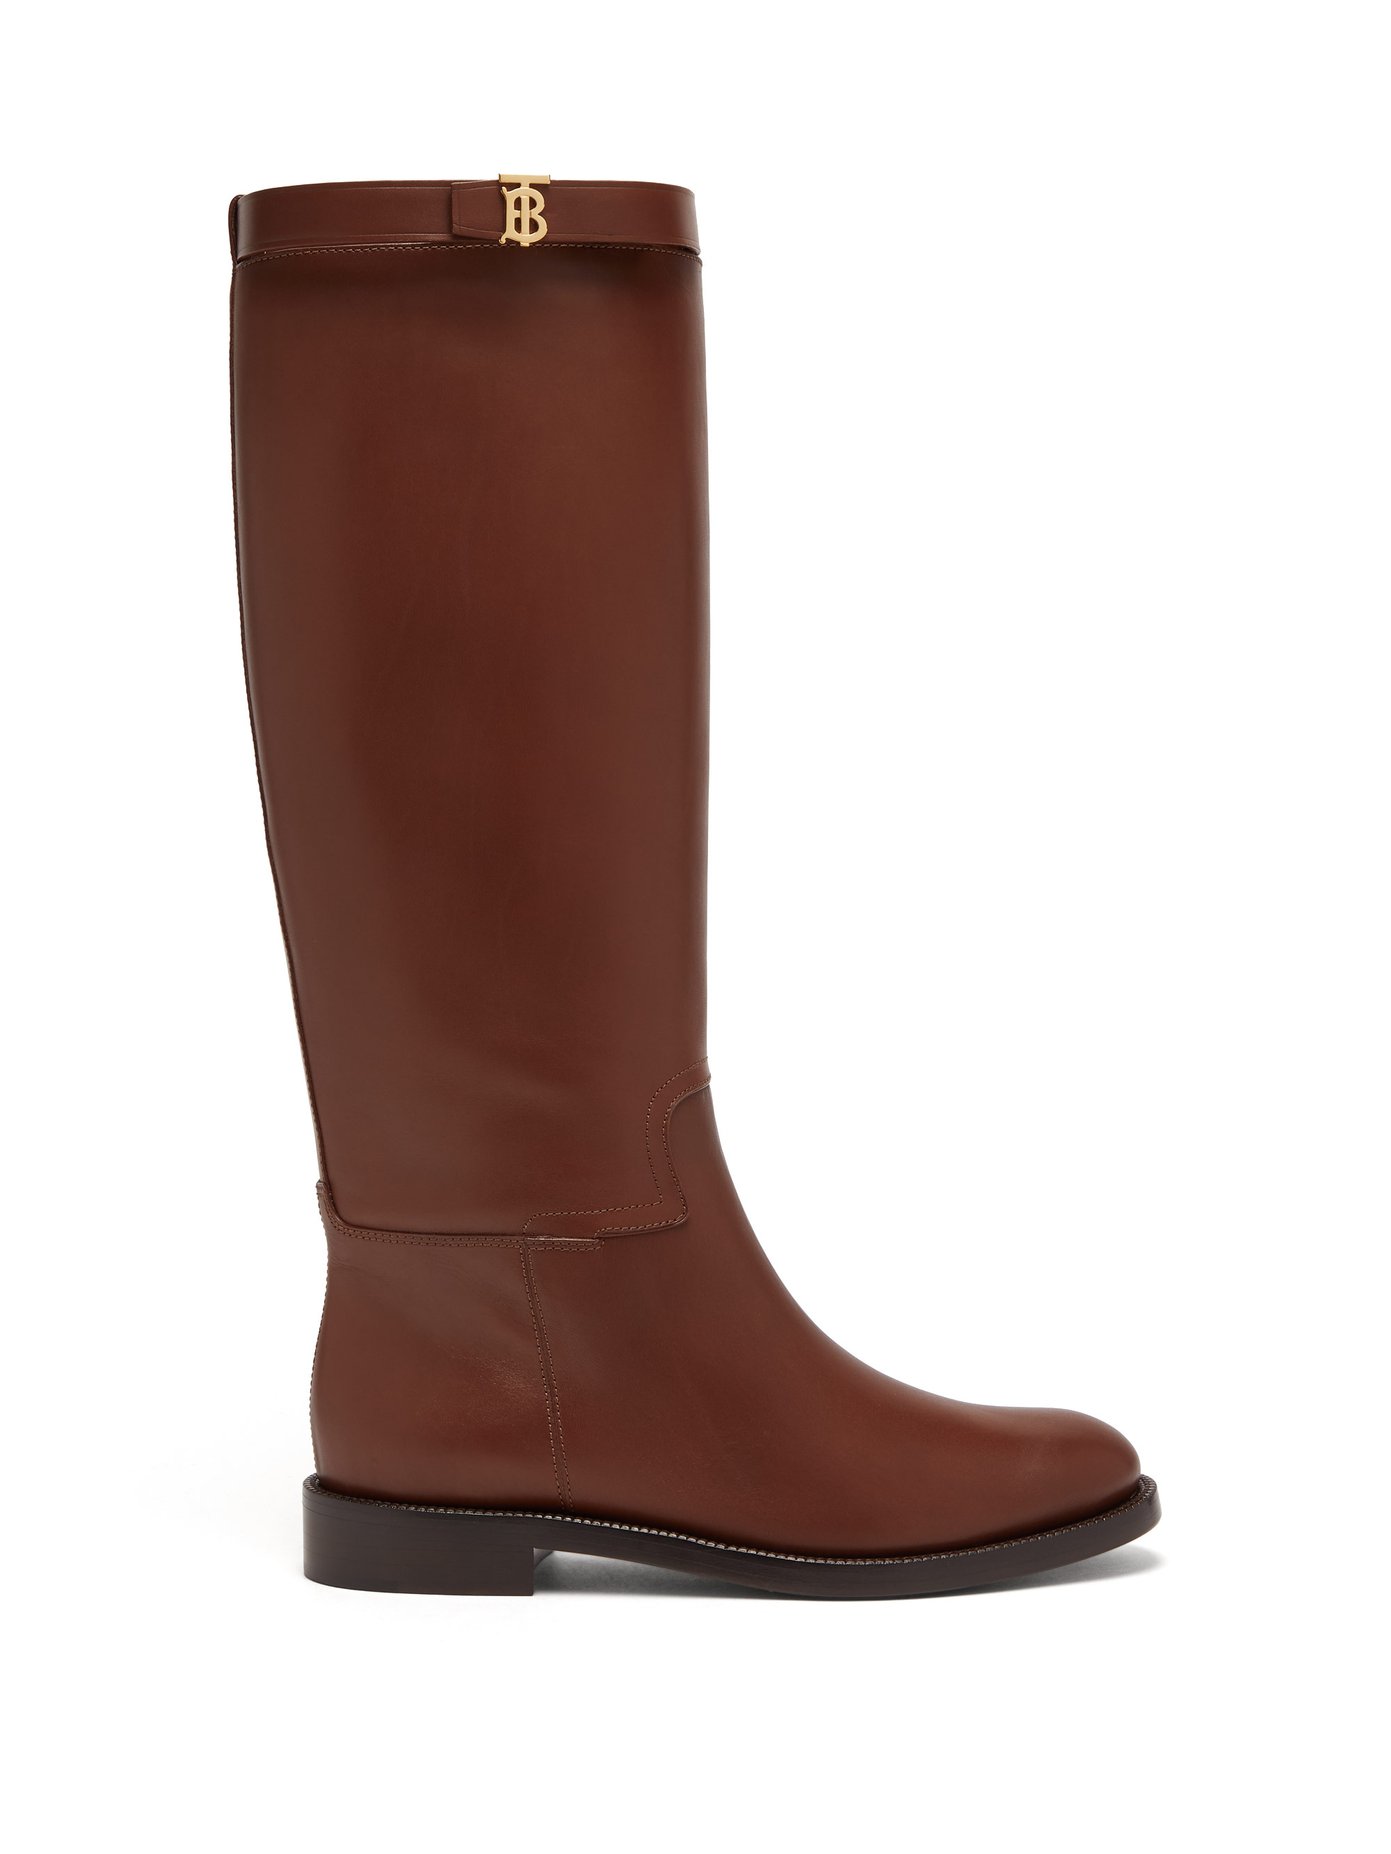 burberry long boots